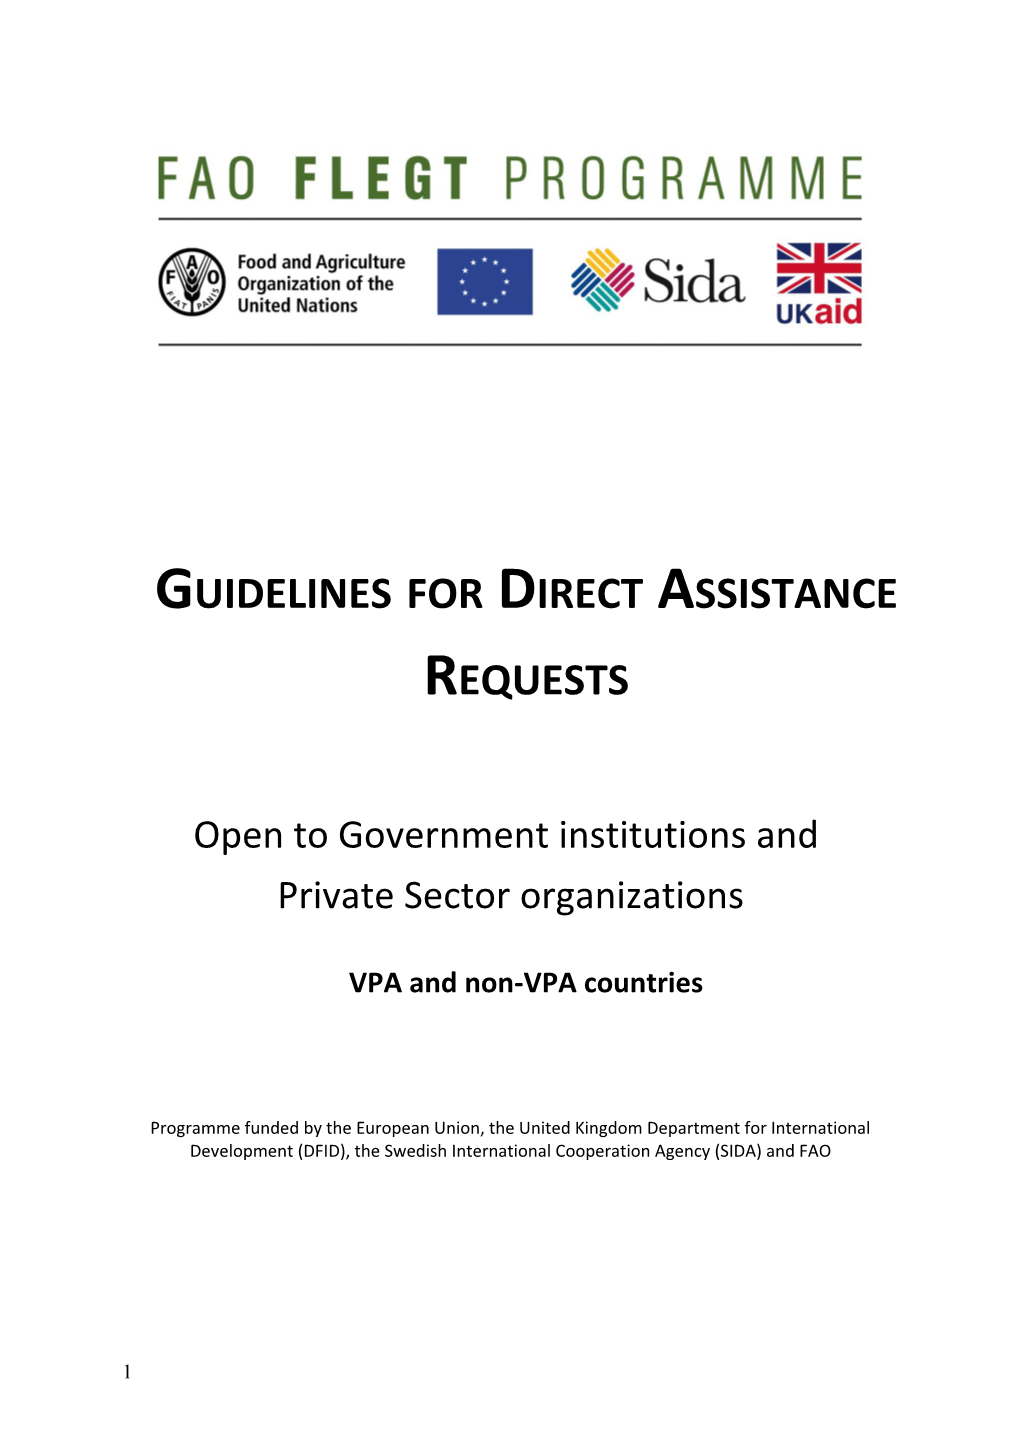 Guidelines for Direct Assistance Requests